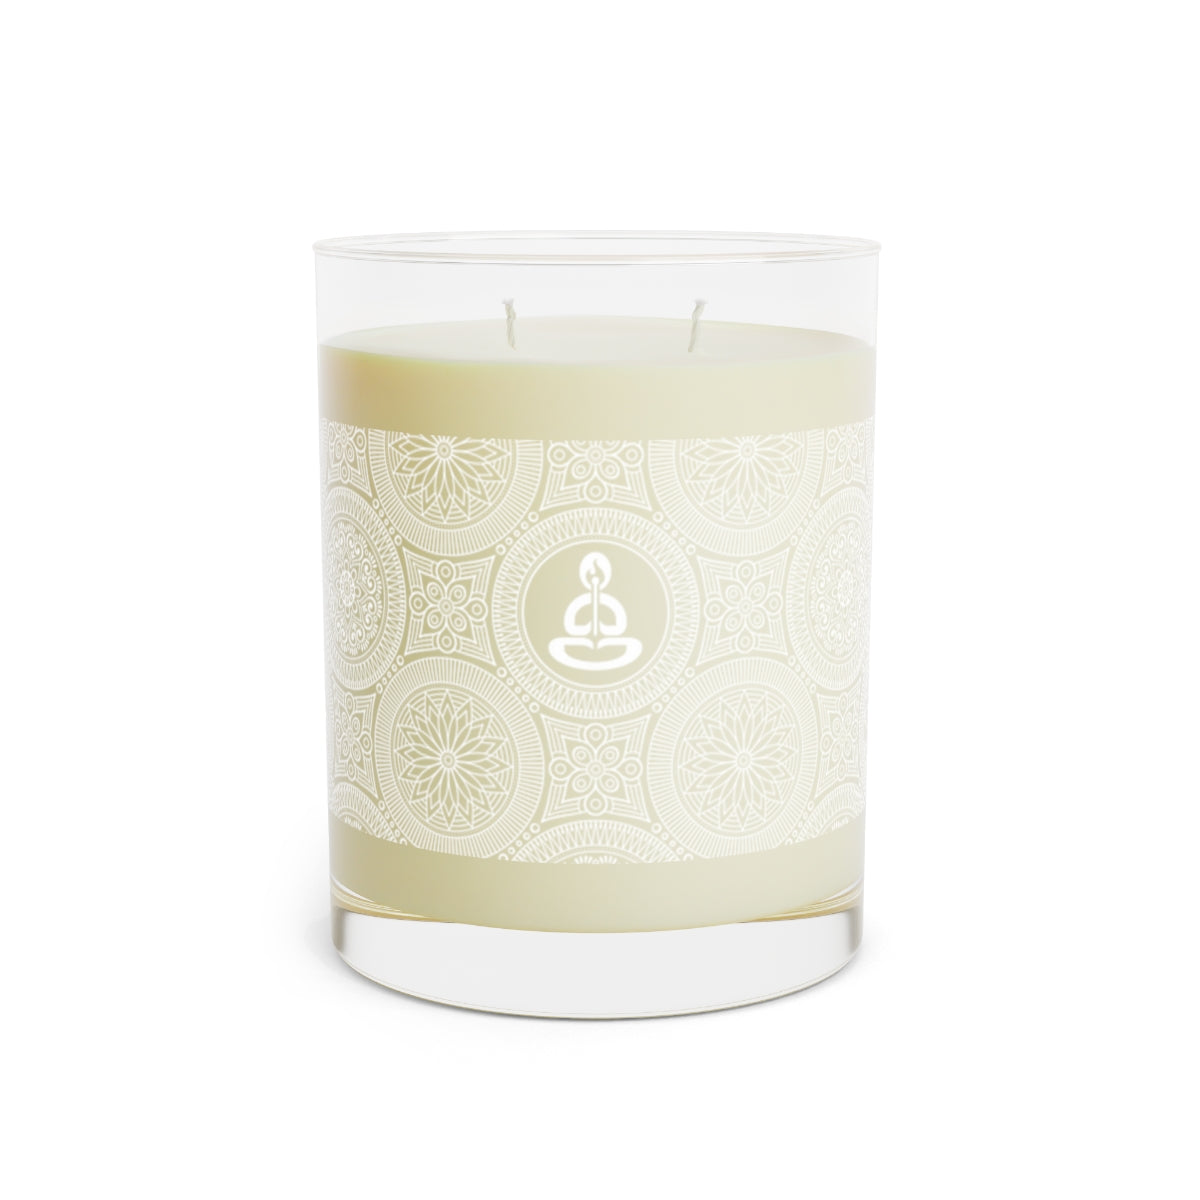 Spiritual Hooligan Scented Candle 65 Hour Reusable Glass with Lid, 11oz